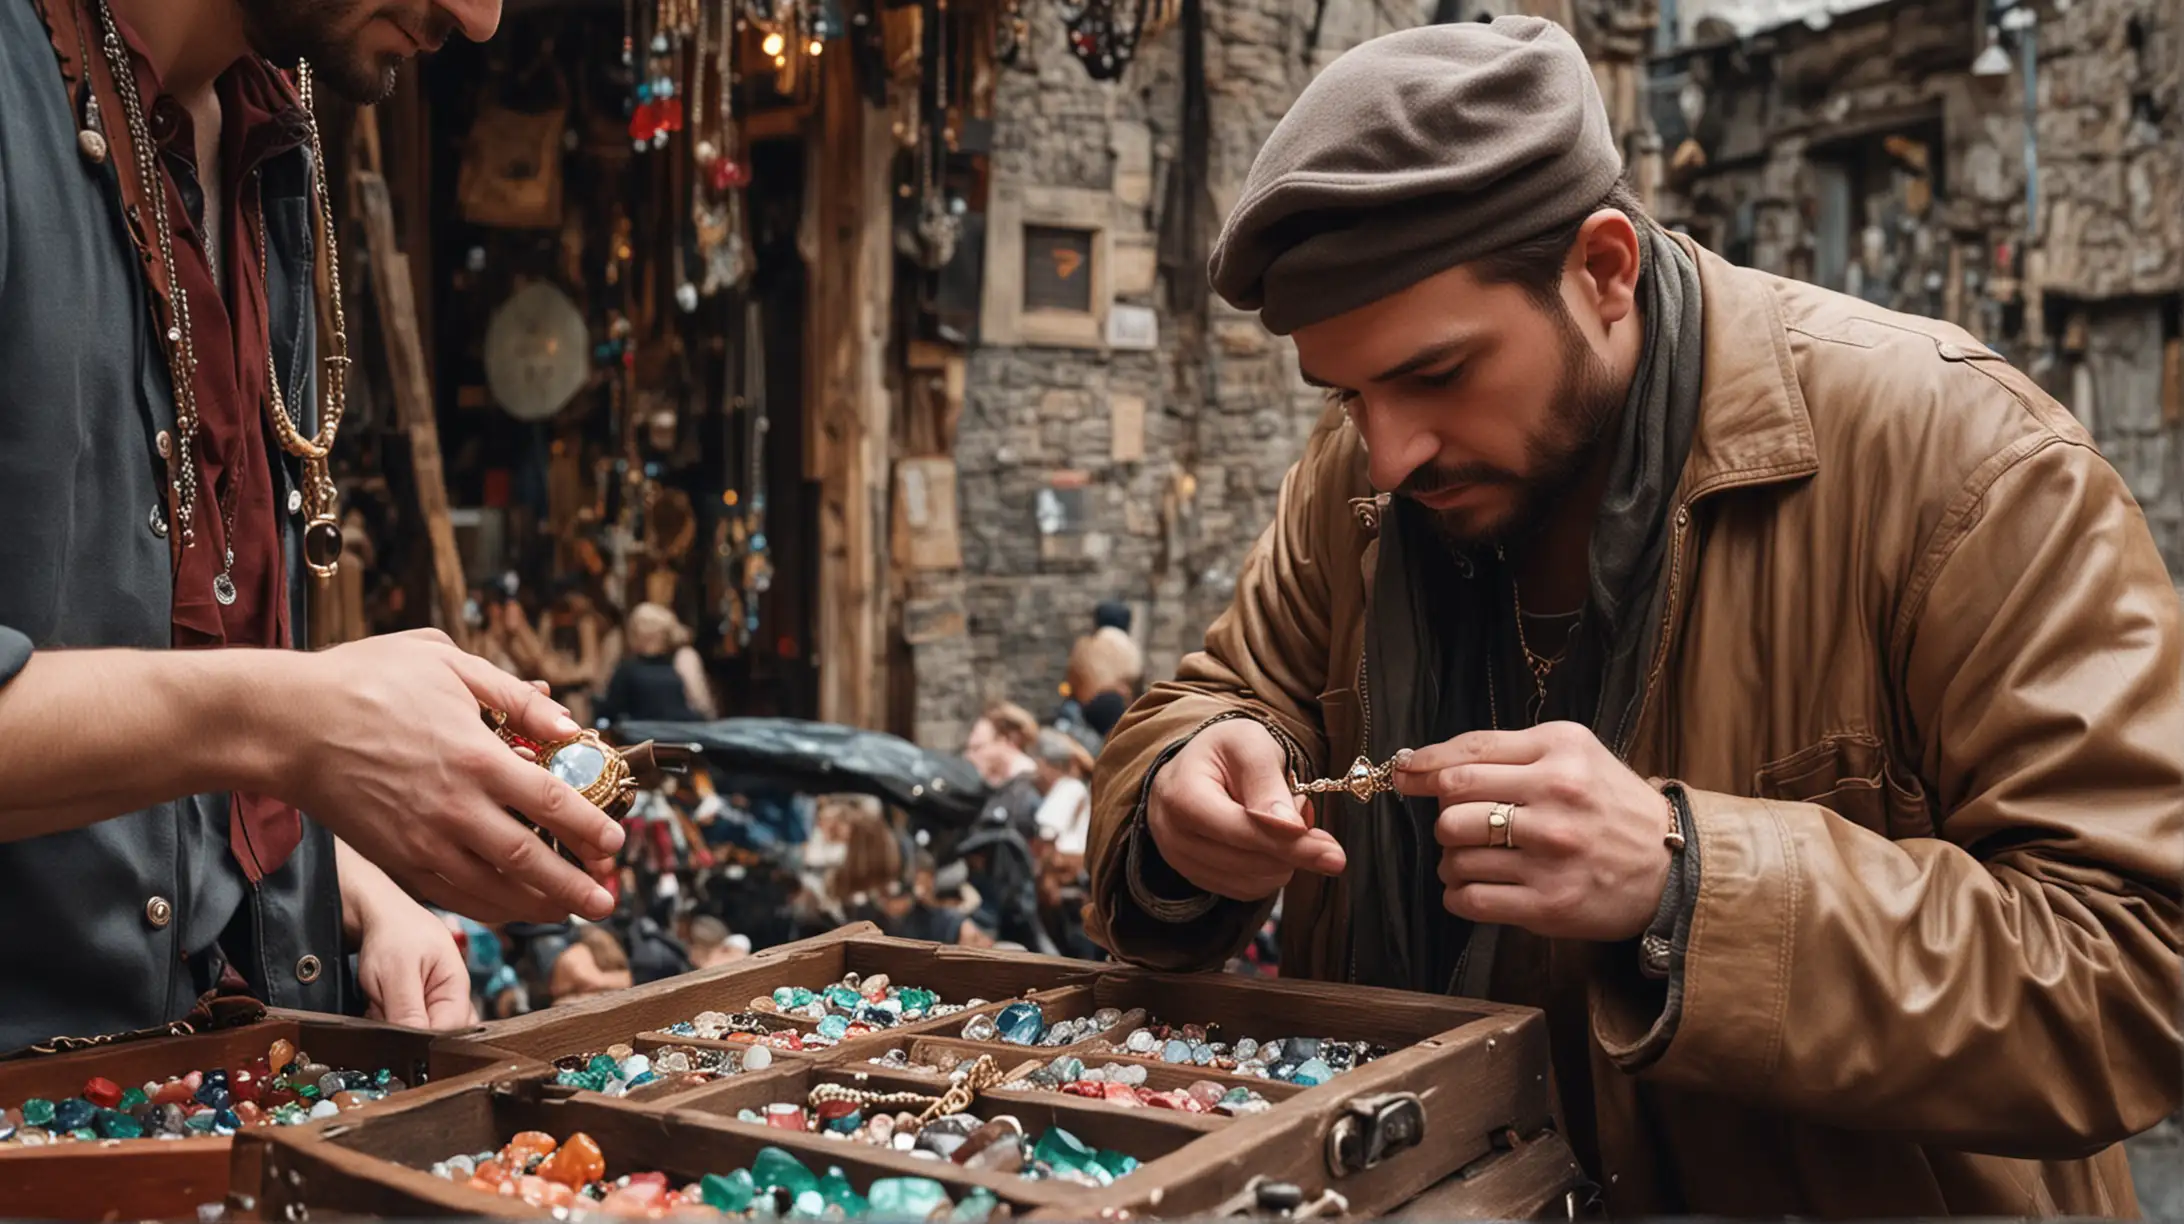 A traveler offers a jeweler to buy a gem from him